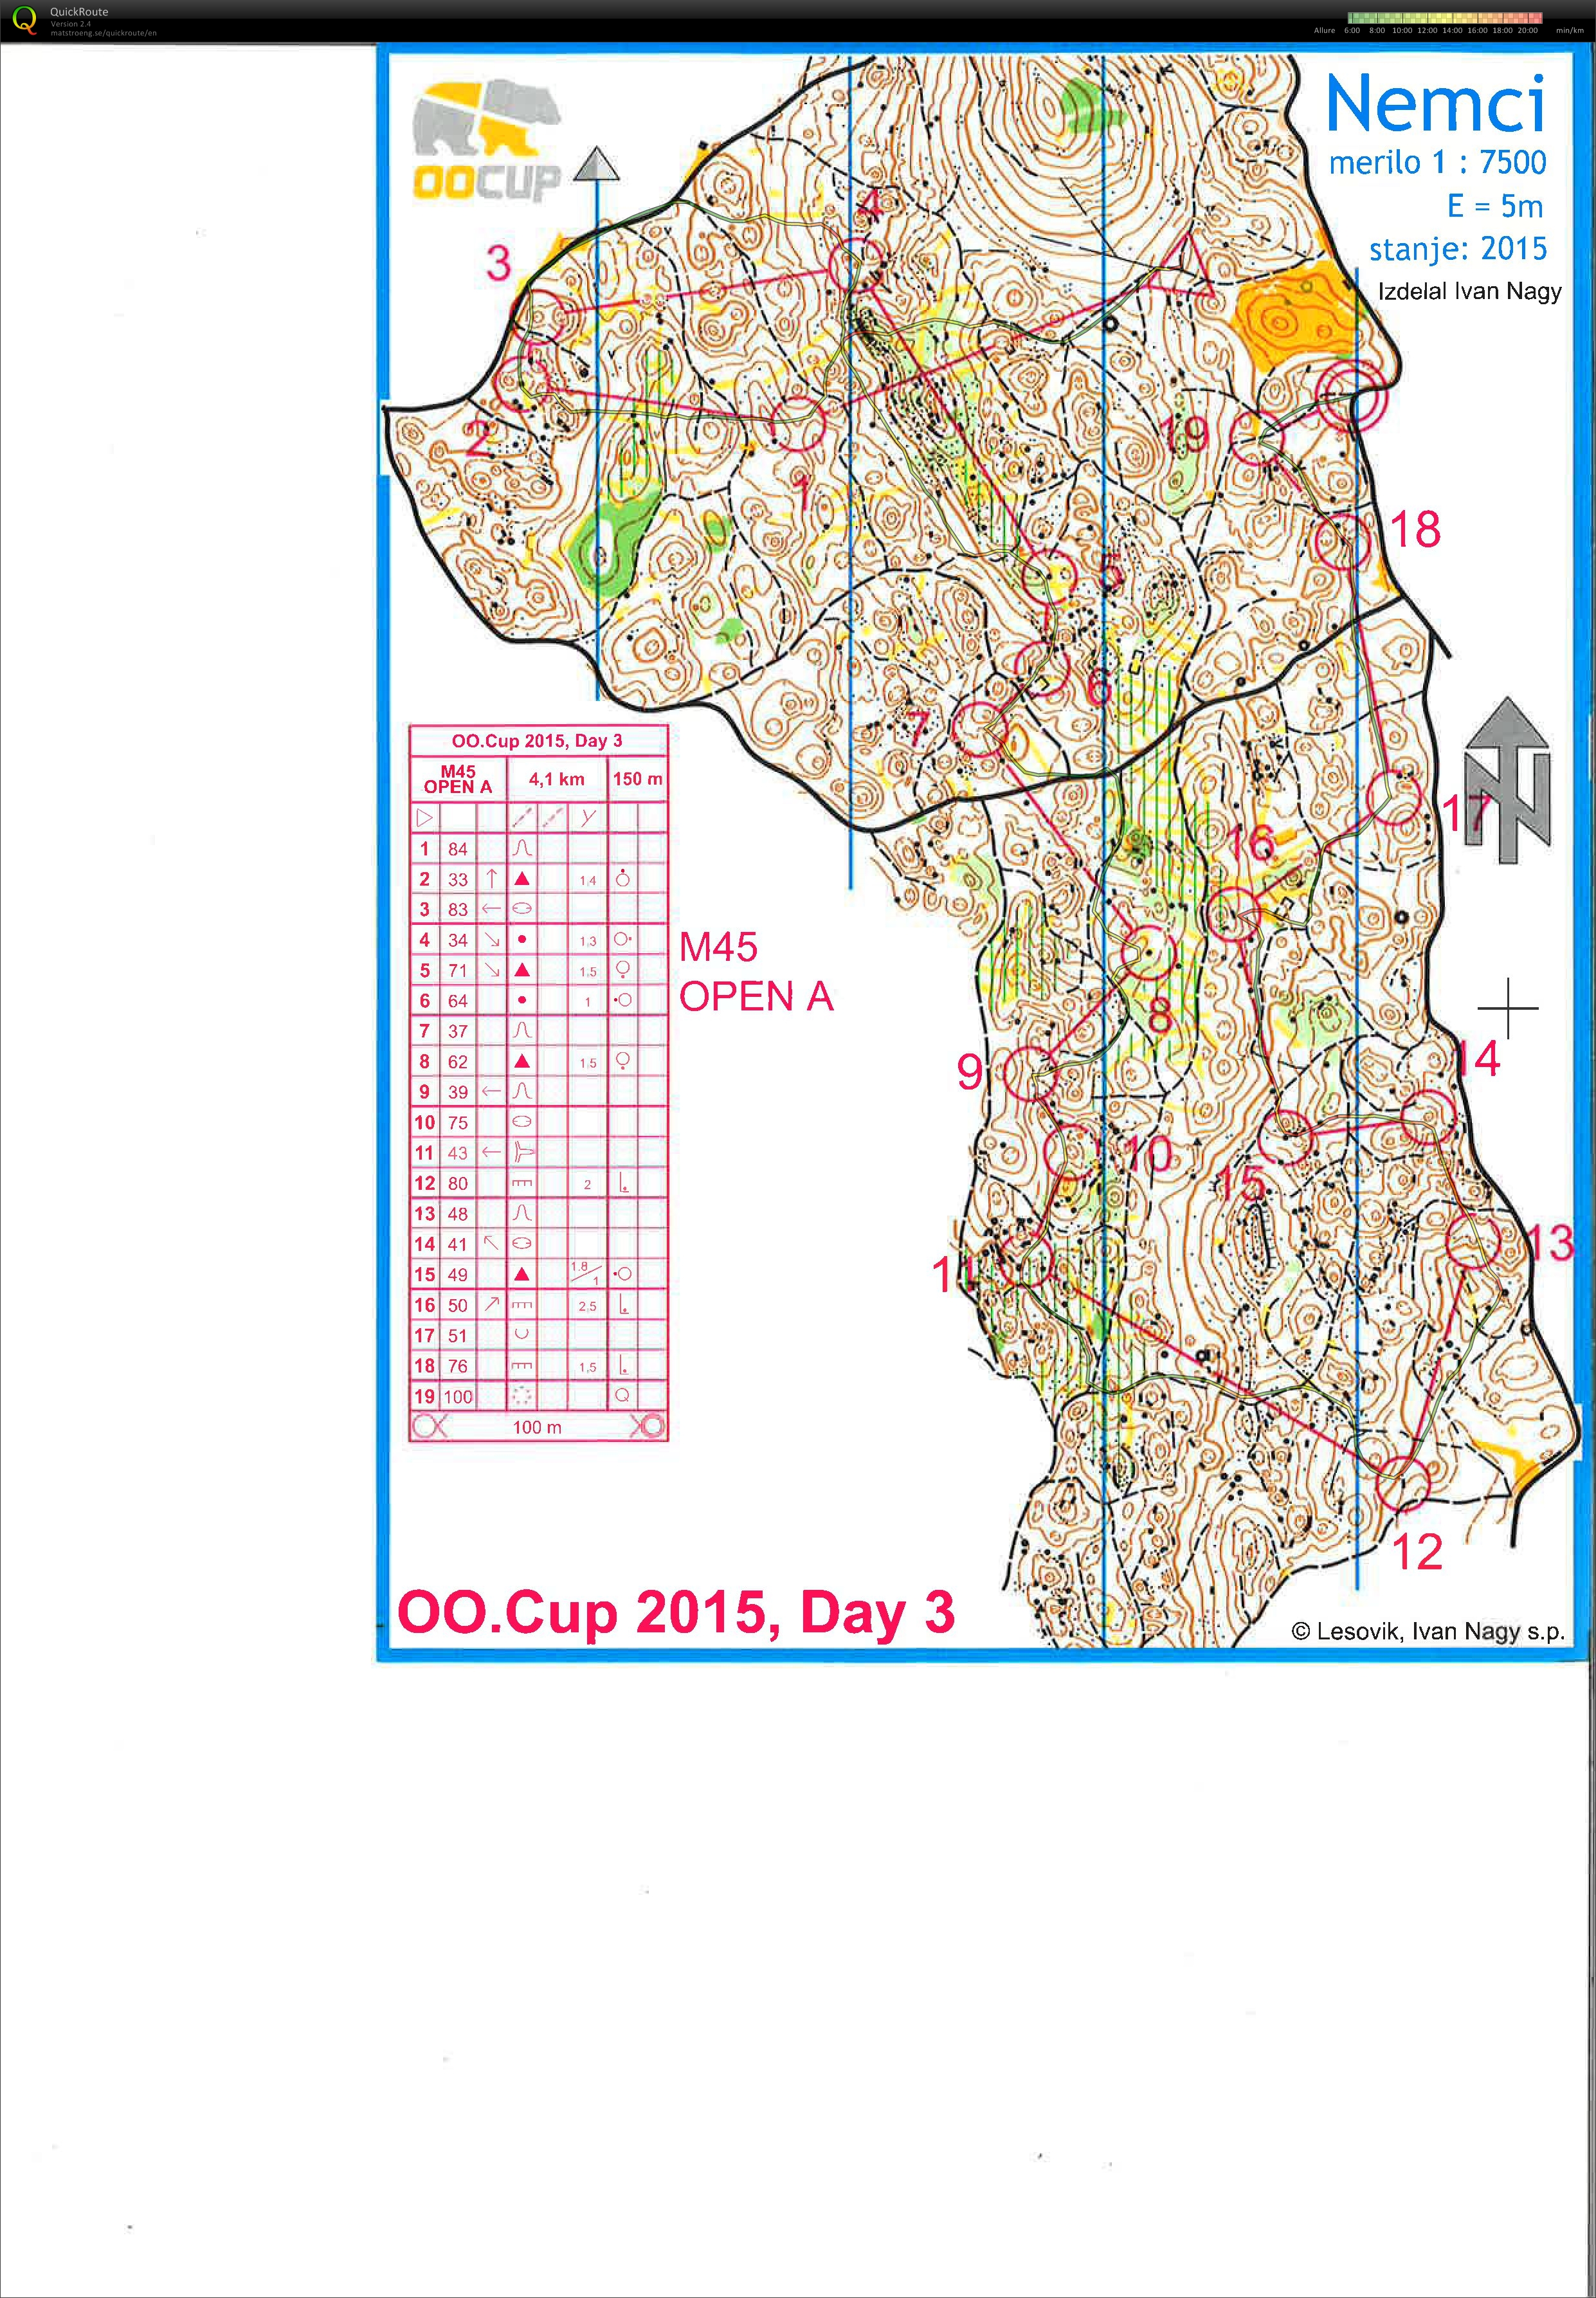 OOCup-Day3 (27.07.2015)